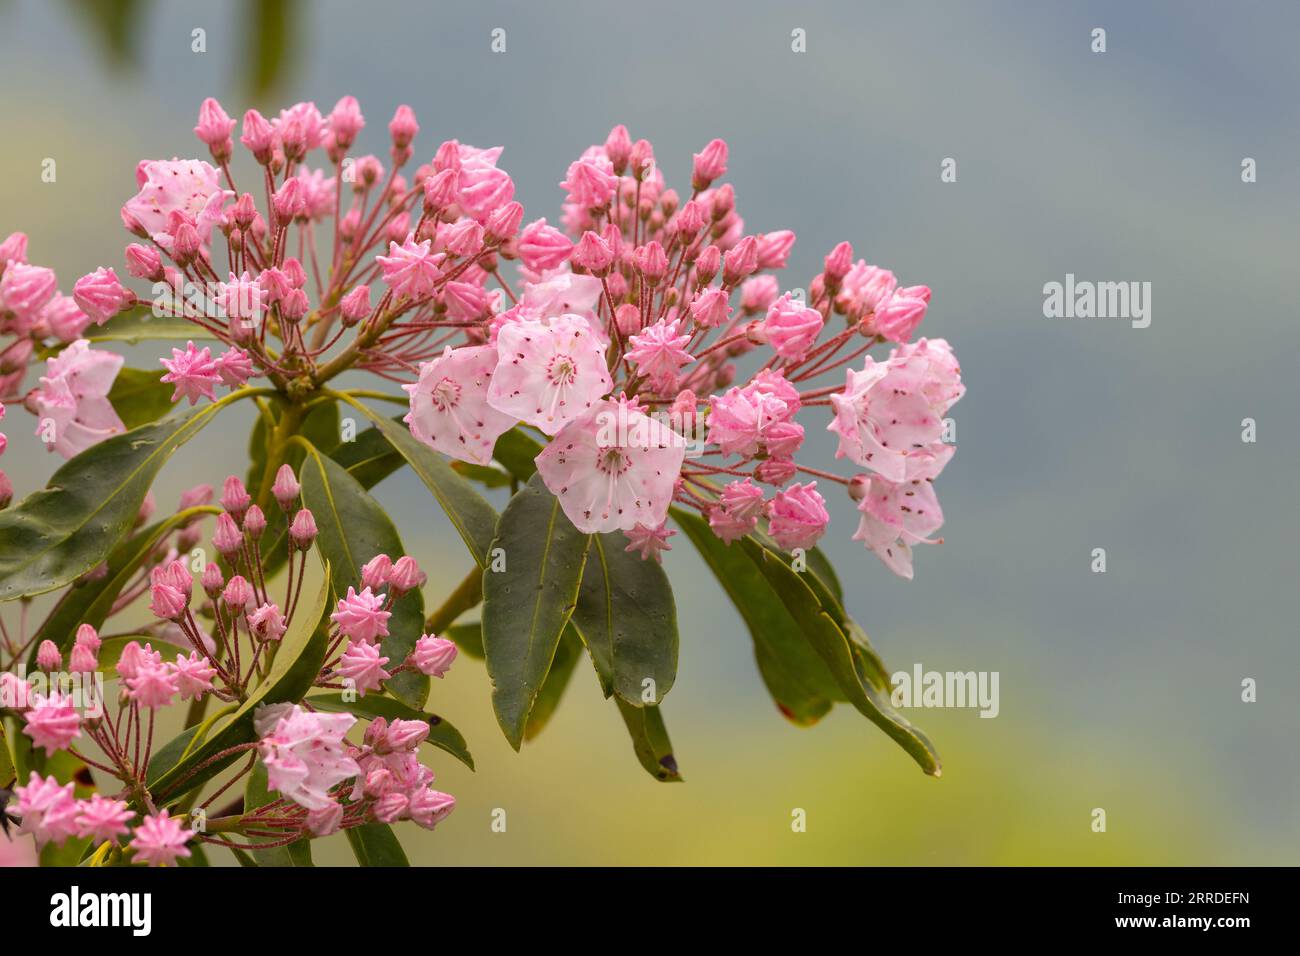 close-up of pinkish mountain laurel beginning to bloom with its hexagonal flowers and a beautiful softly blurred background. Stock Photo